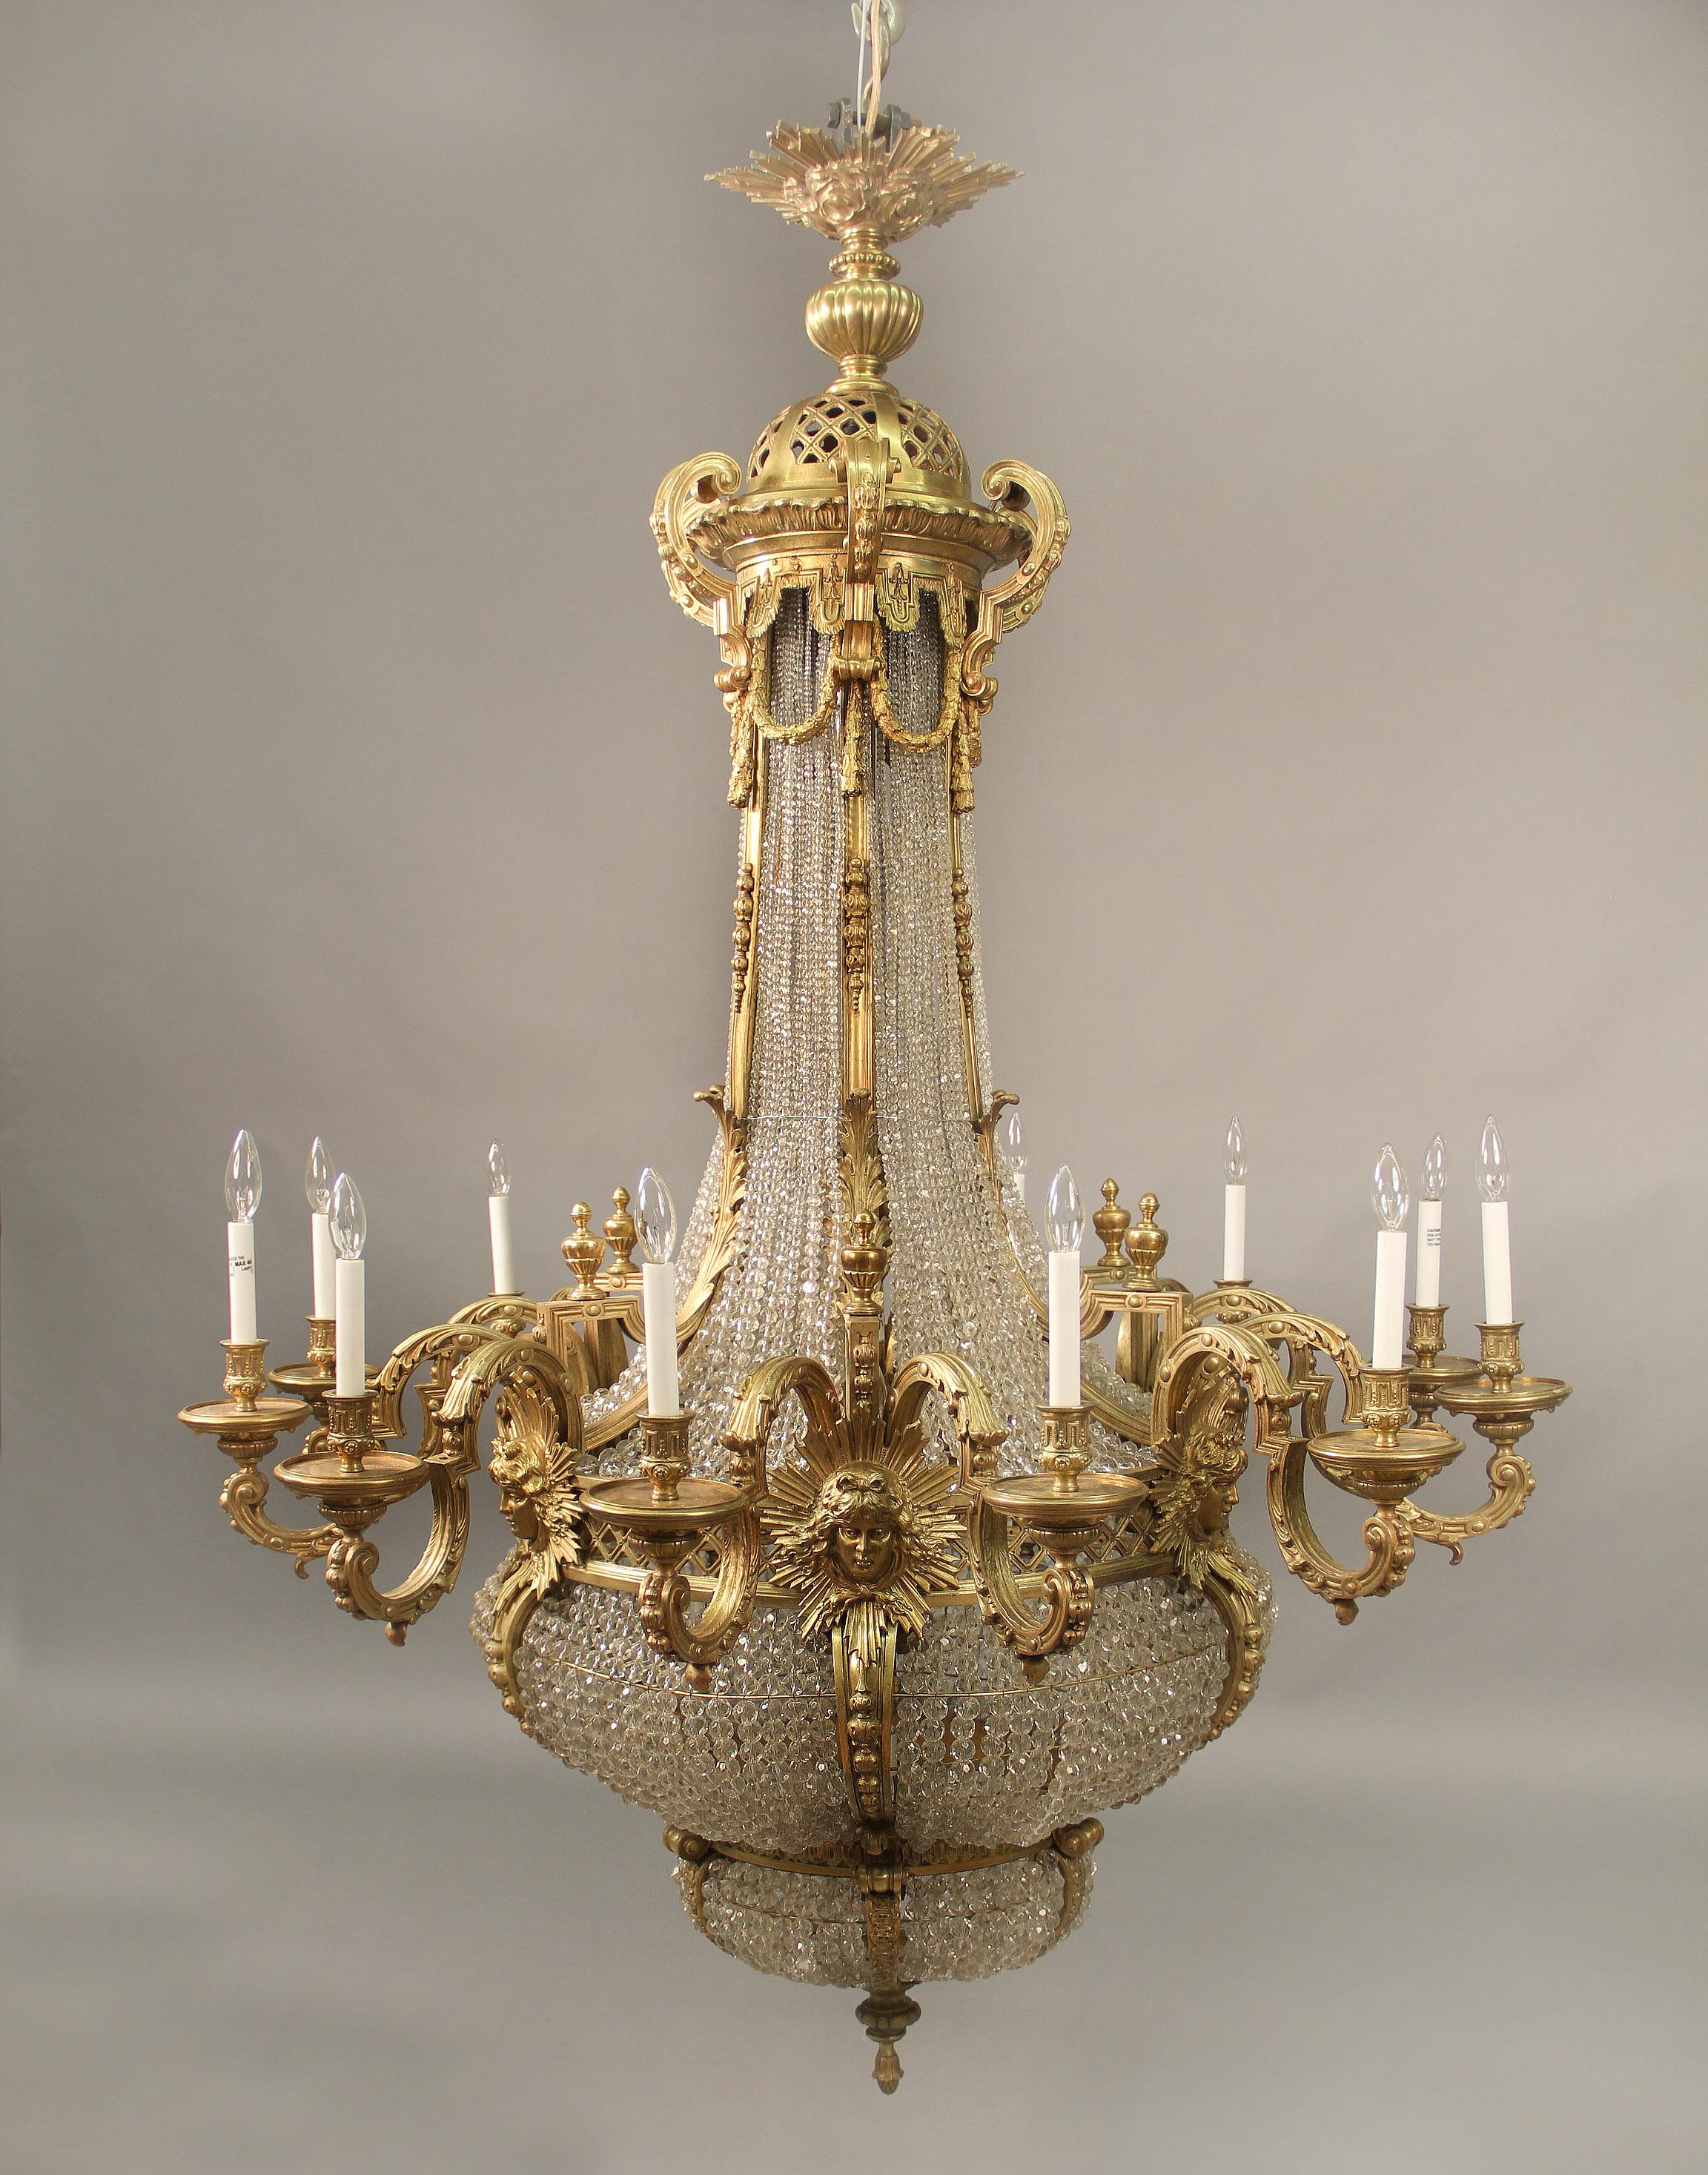 A very impressive and palatial late 19th century gilt bronze and crystal twenty four light basket chandelier

The large sunburst corona above a reticulated pierced crown adorned with bronze curtains and garlands, long beaded neck leading to a